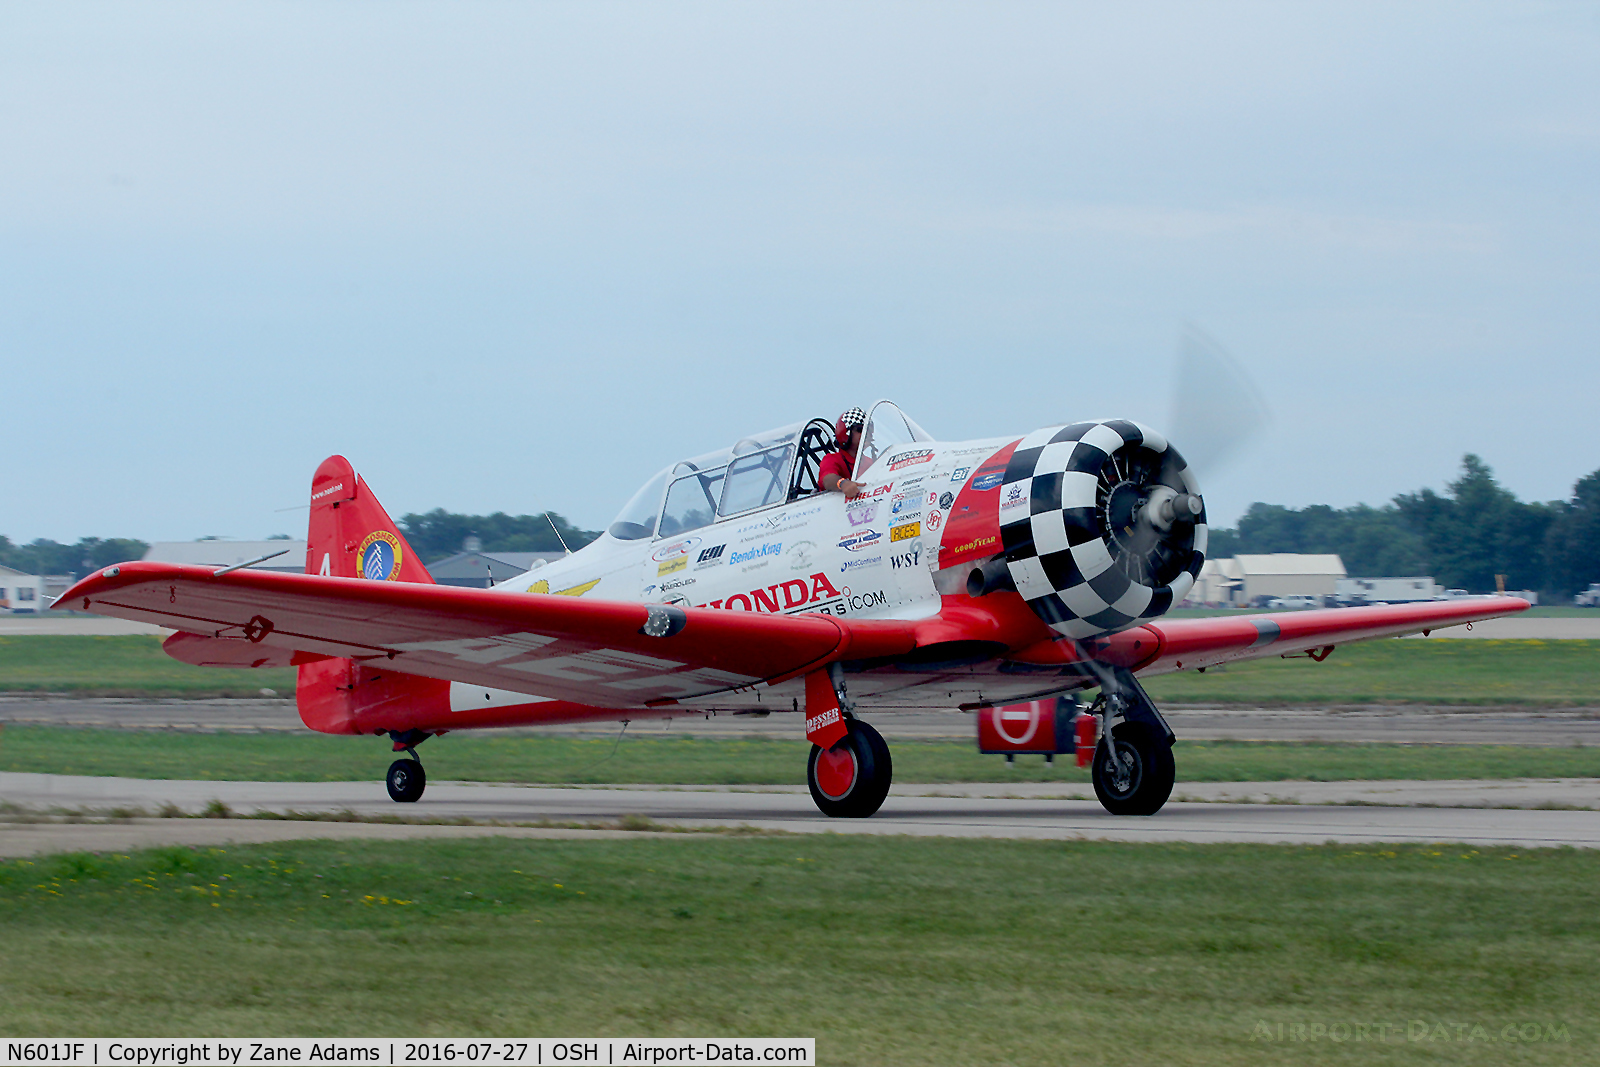 N601JF, 1943 North American AT-6C C/N 88-12151, At the 2016 EAA AirVenture - Oshkosh, Wisconsin